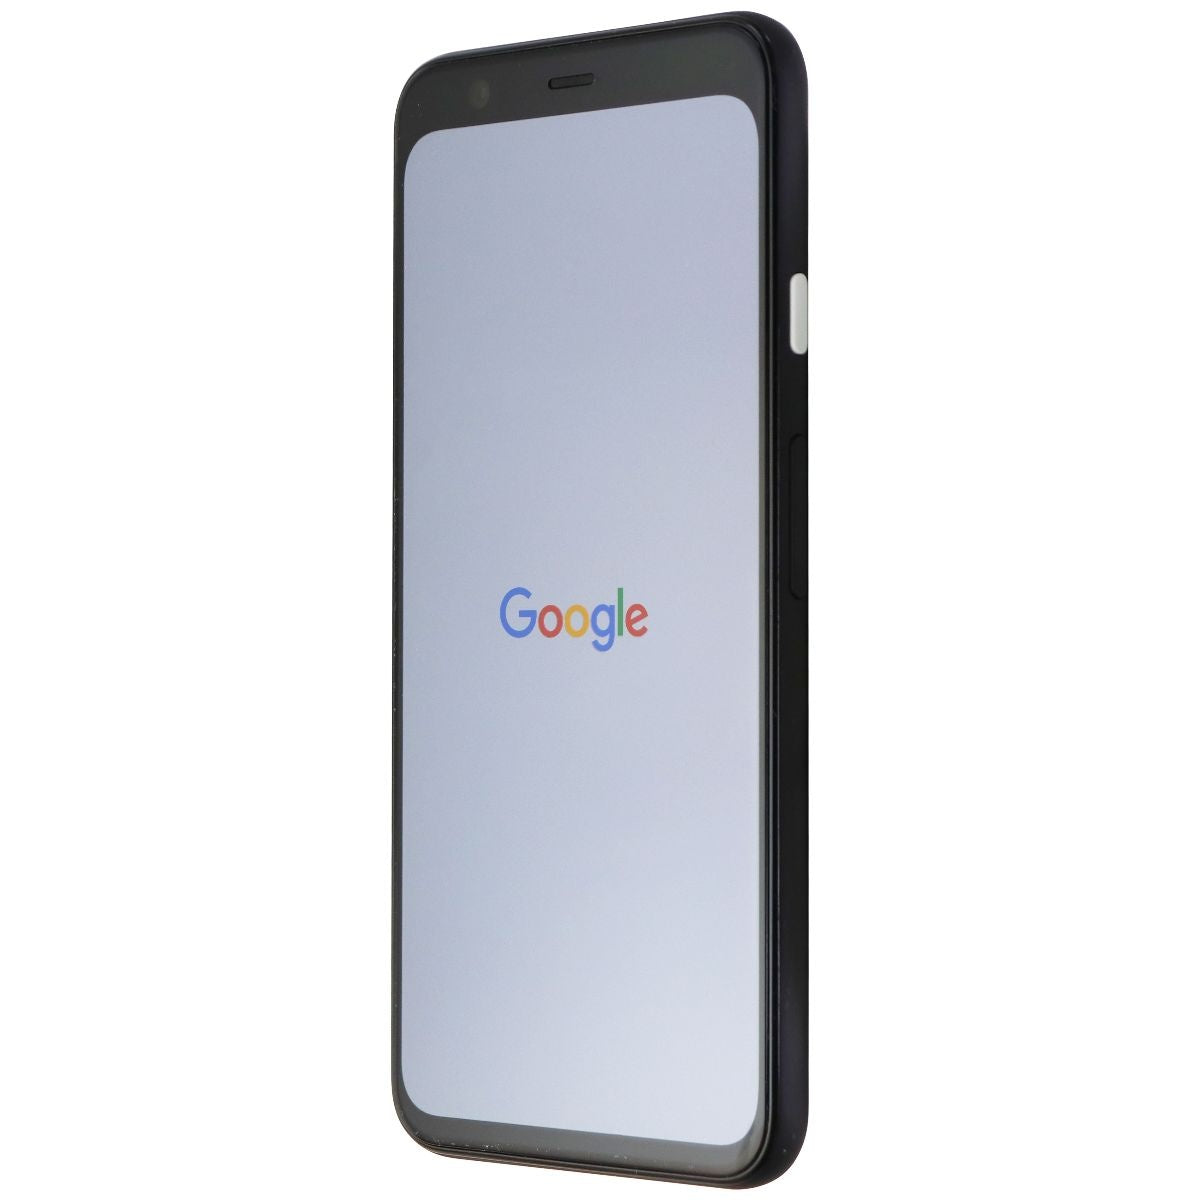 Google Pixel 4 (5.7-inch) Smartphone (G020I) GSM + CDMA - 64GB / Clearly White Cell Phones & Smartphones Google    - Simple Cell Bulk Wholesale Pricing - USA Seller